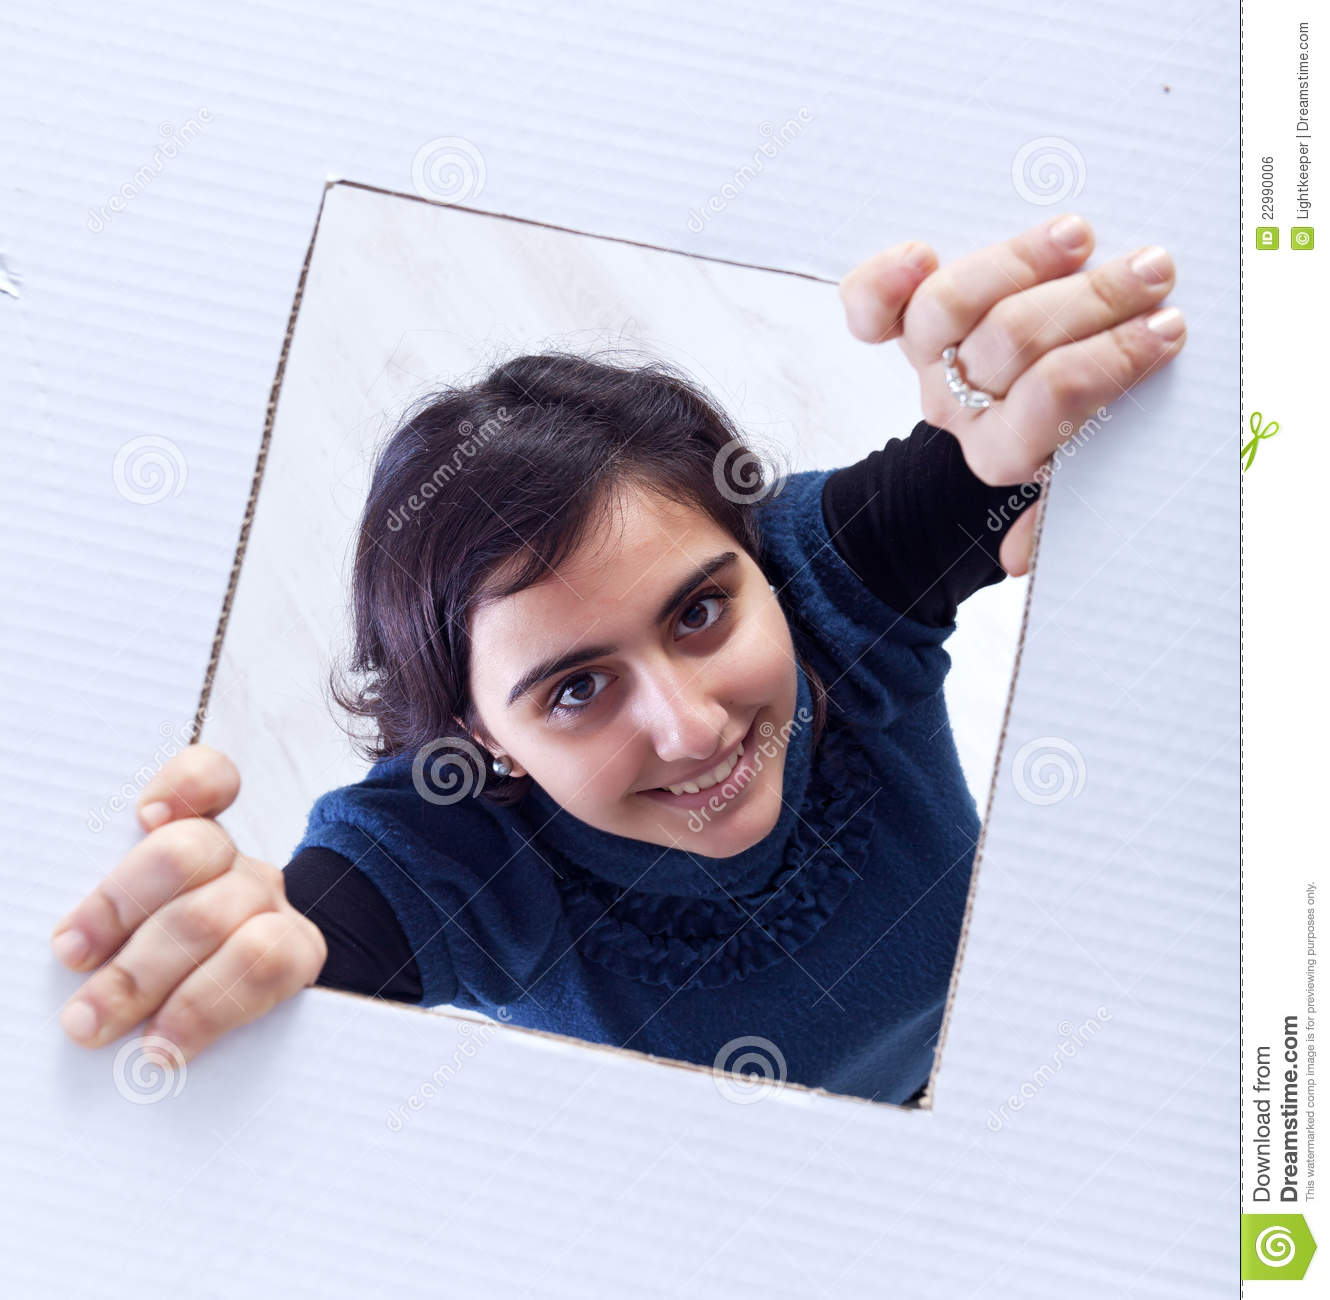 Teenager Breaking Out Of The Box Royalty Free Stock Image   Image    